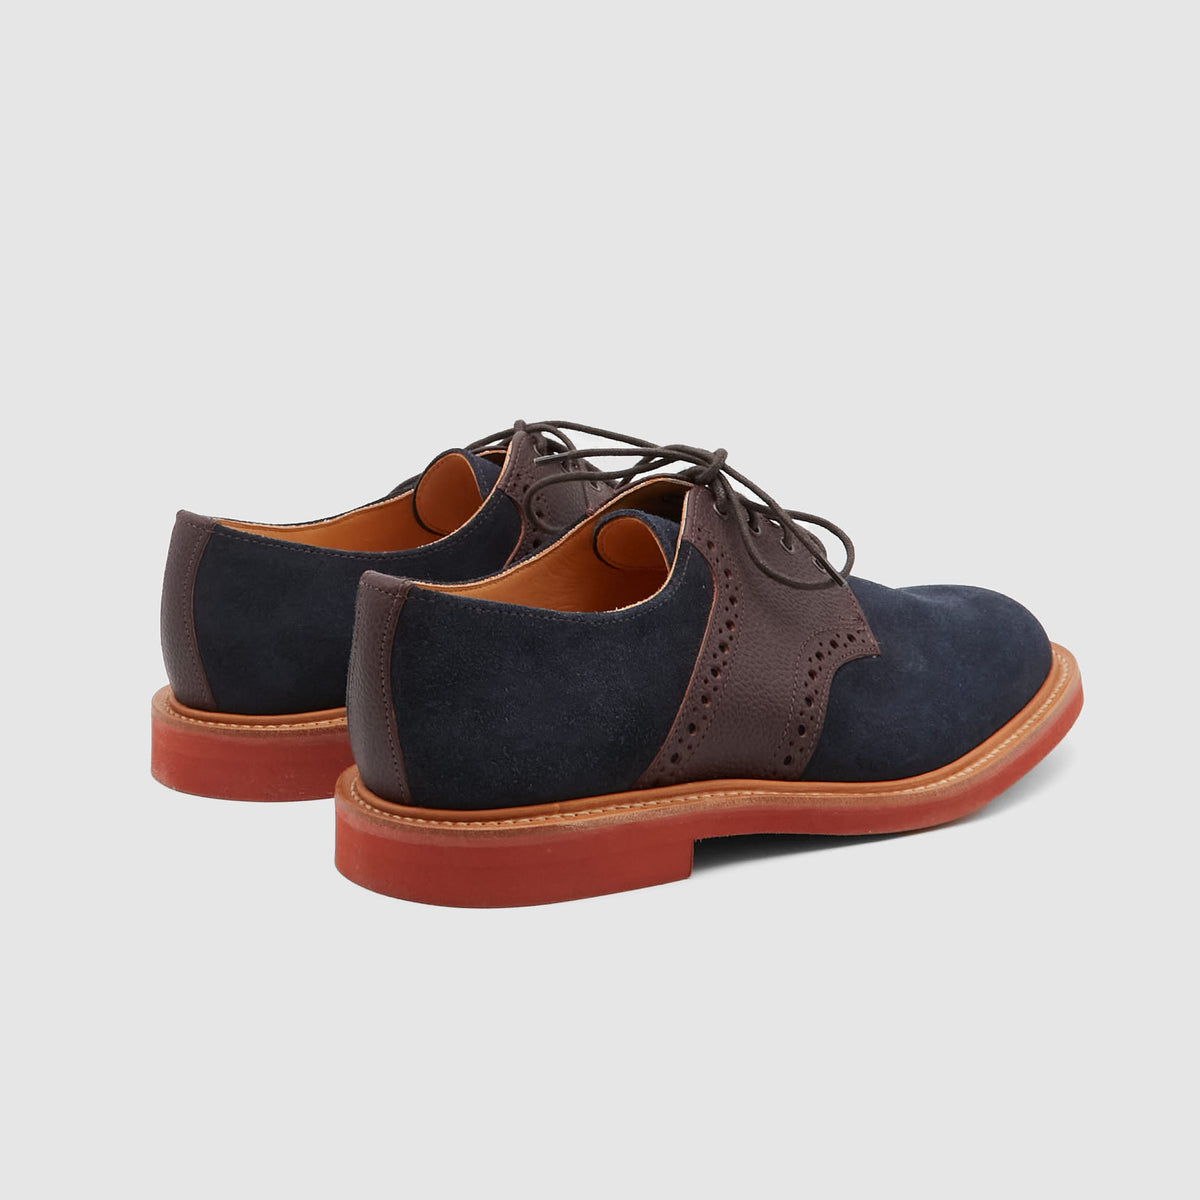 Mark McNairy Two Tone Suede Saddle Shoes